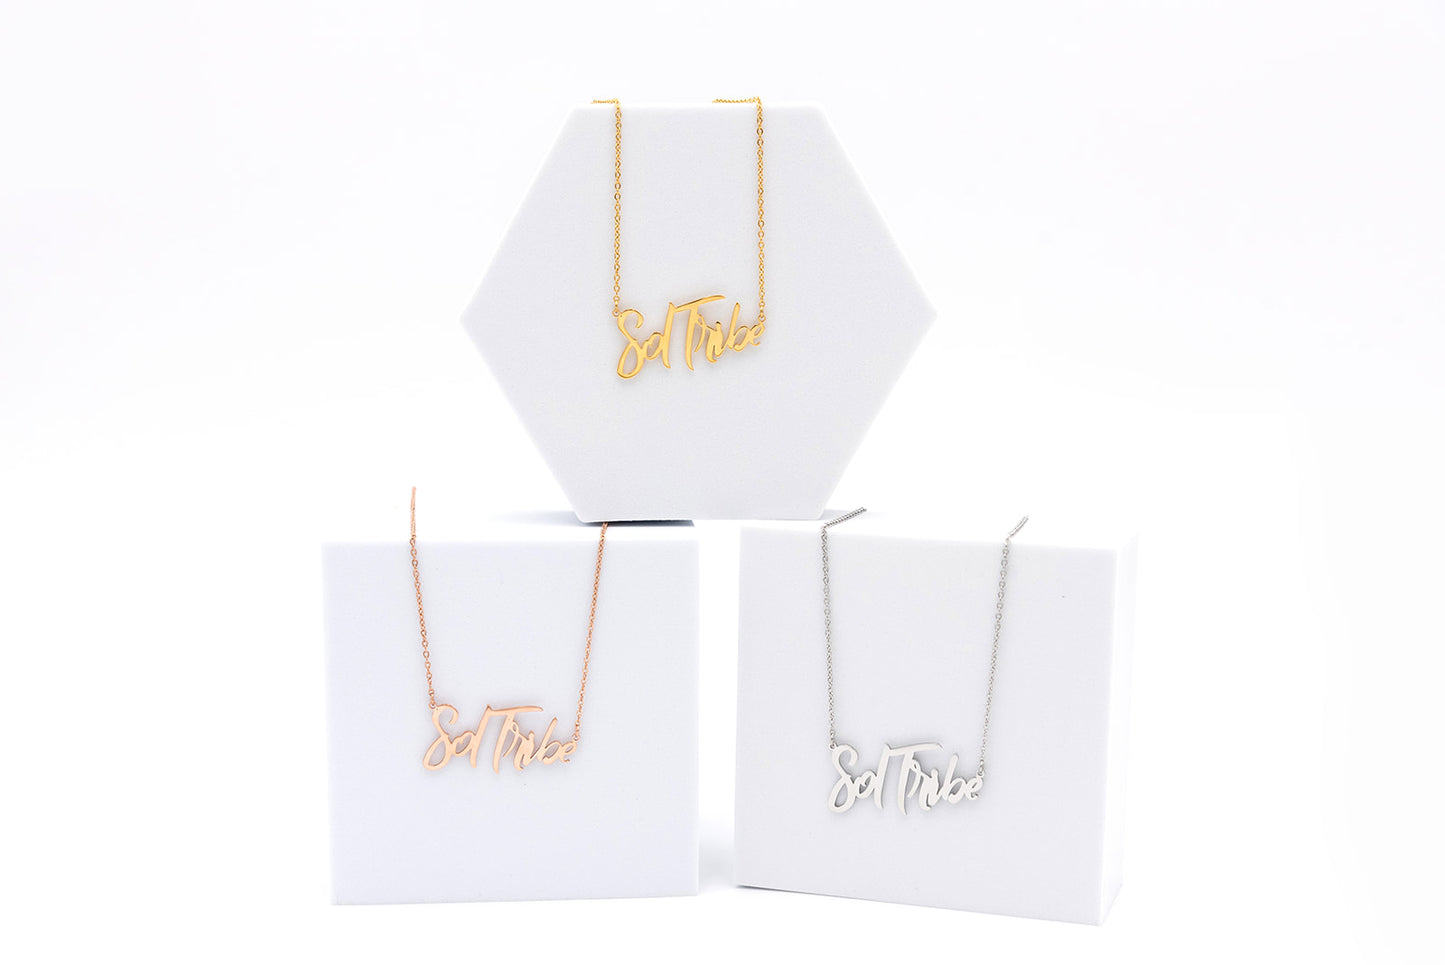 sol tribe affirmation necklaces from sol rise essentials hypoallergenic cute, positive jewelry